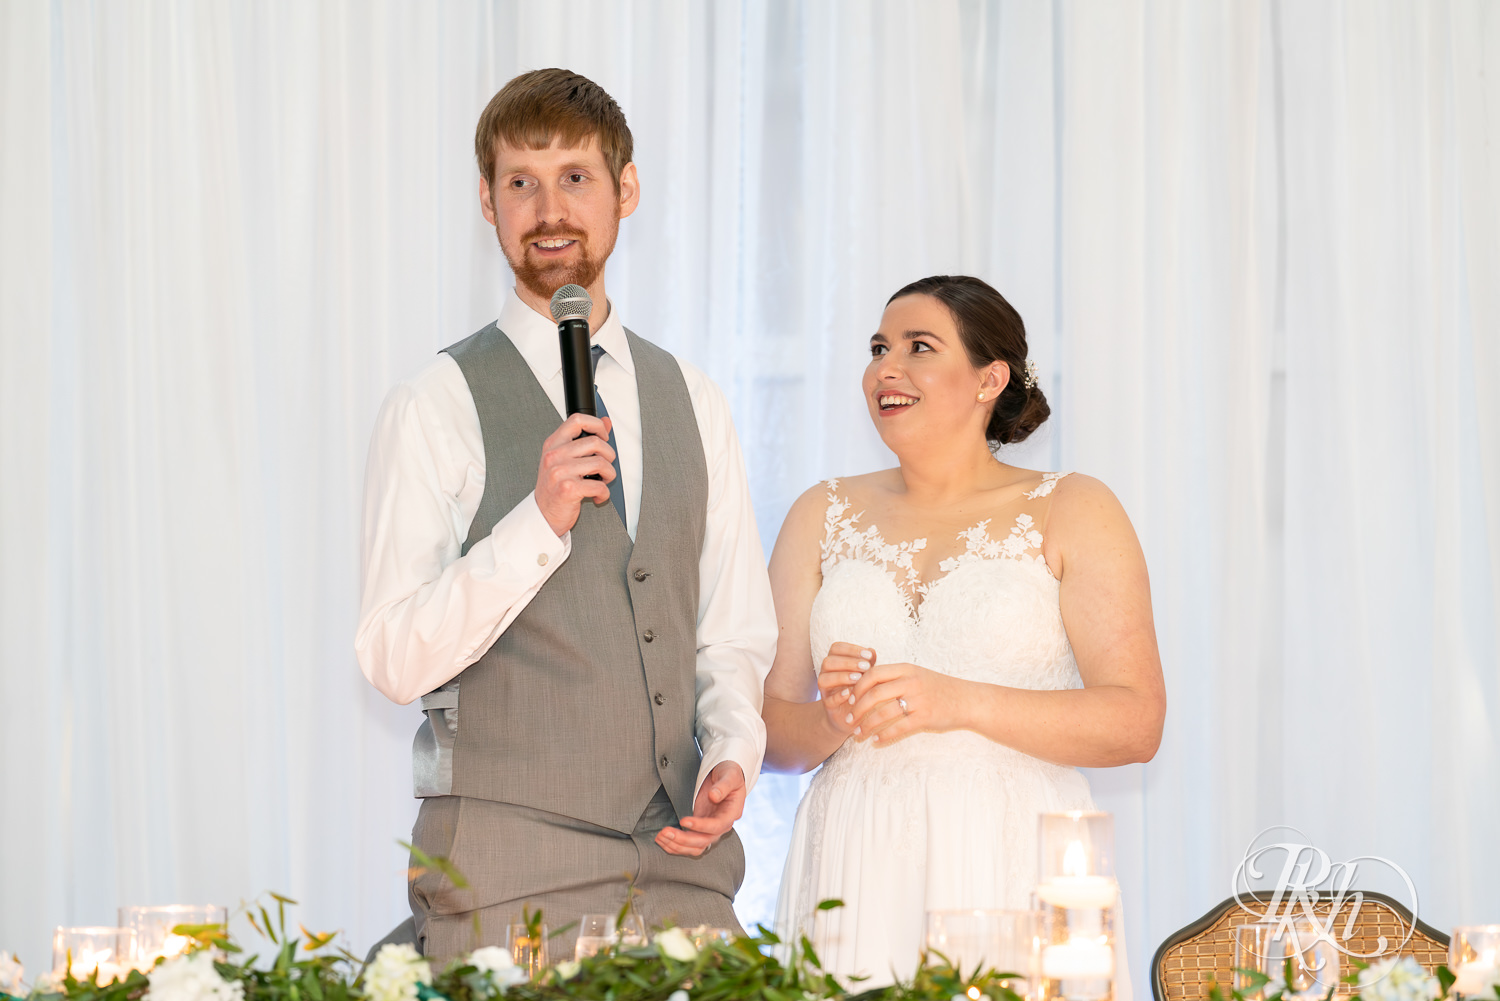 Bride and groom smile during wedding speeches at Doubletree Hilton Saint Paul in Saint Paul, Minnesota.